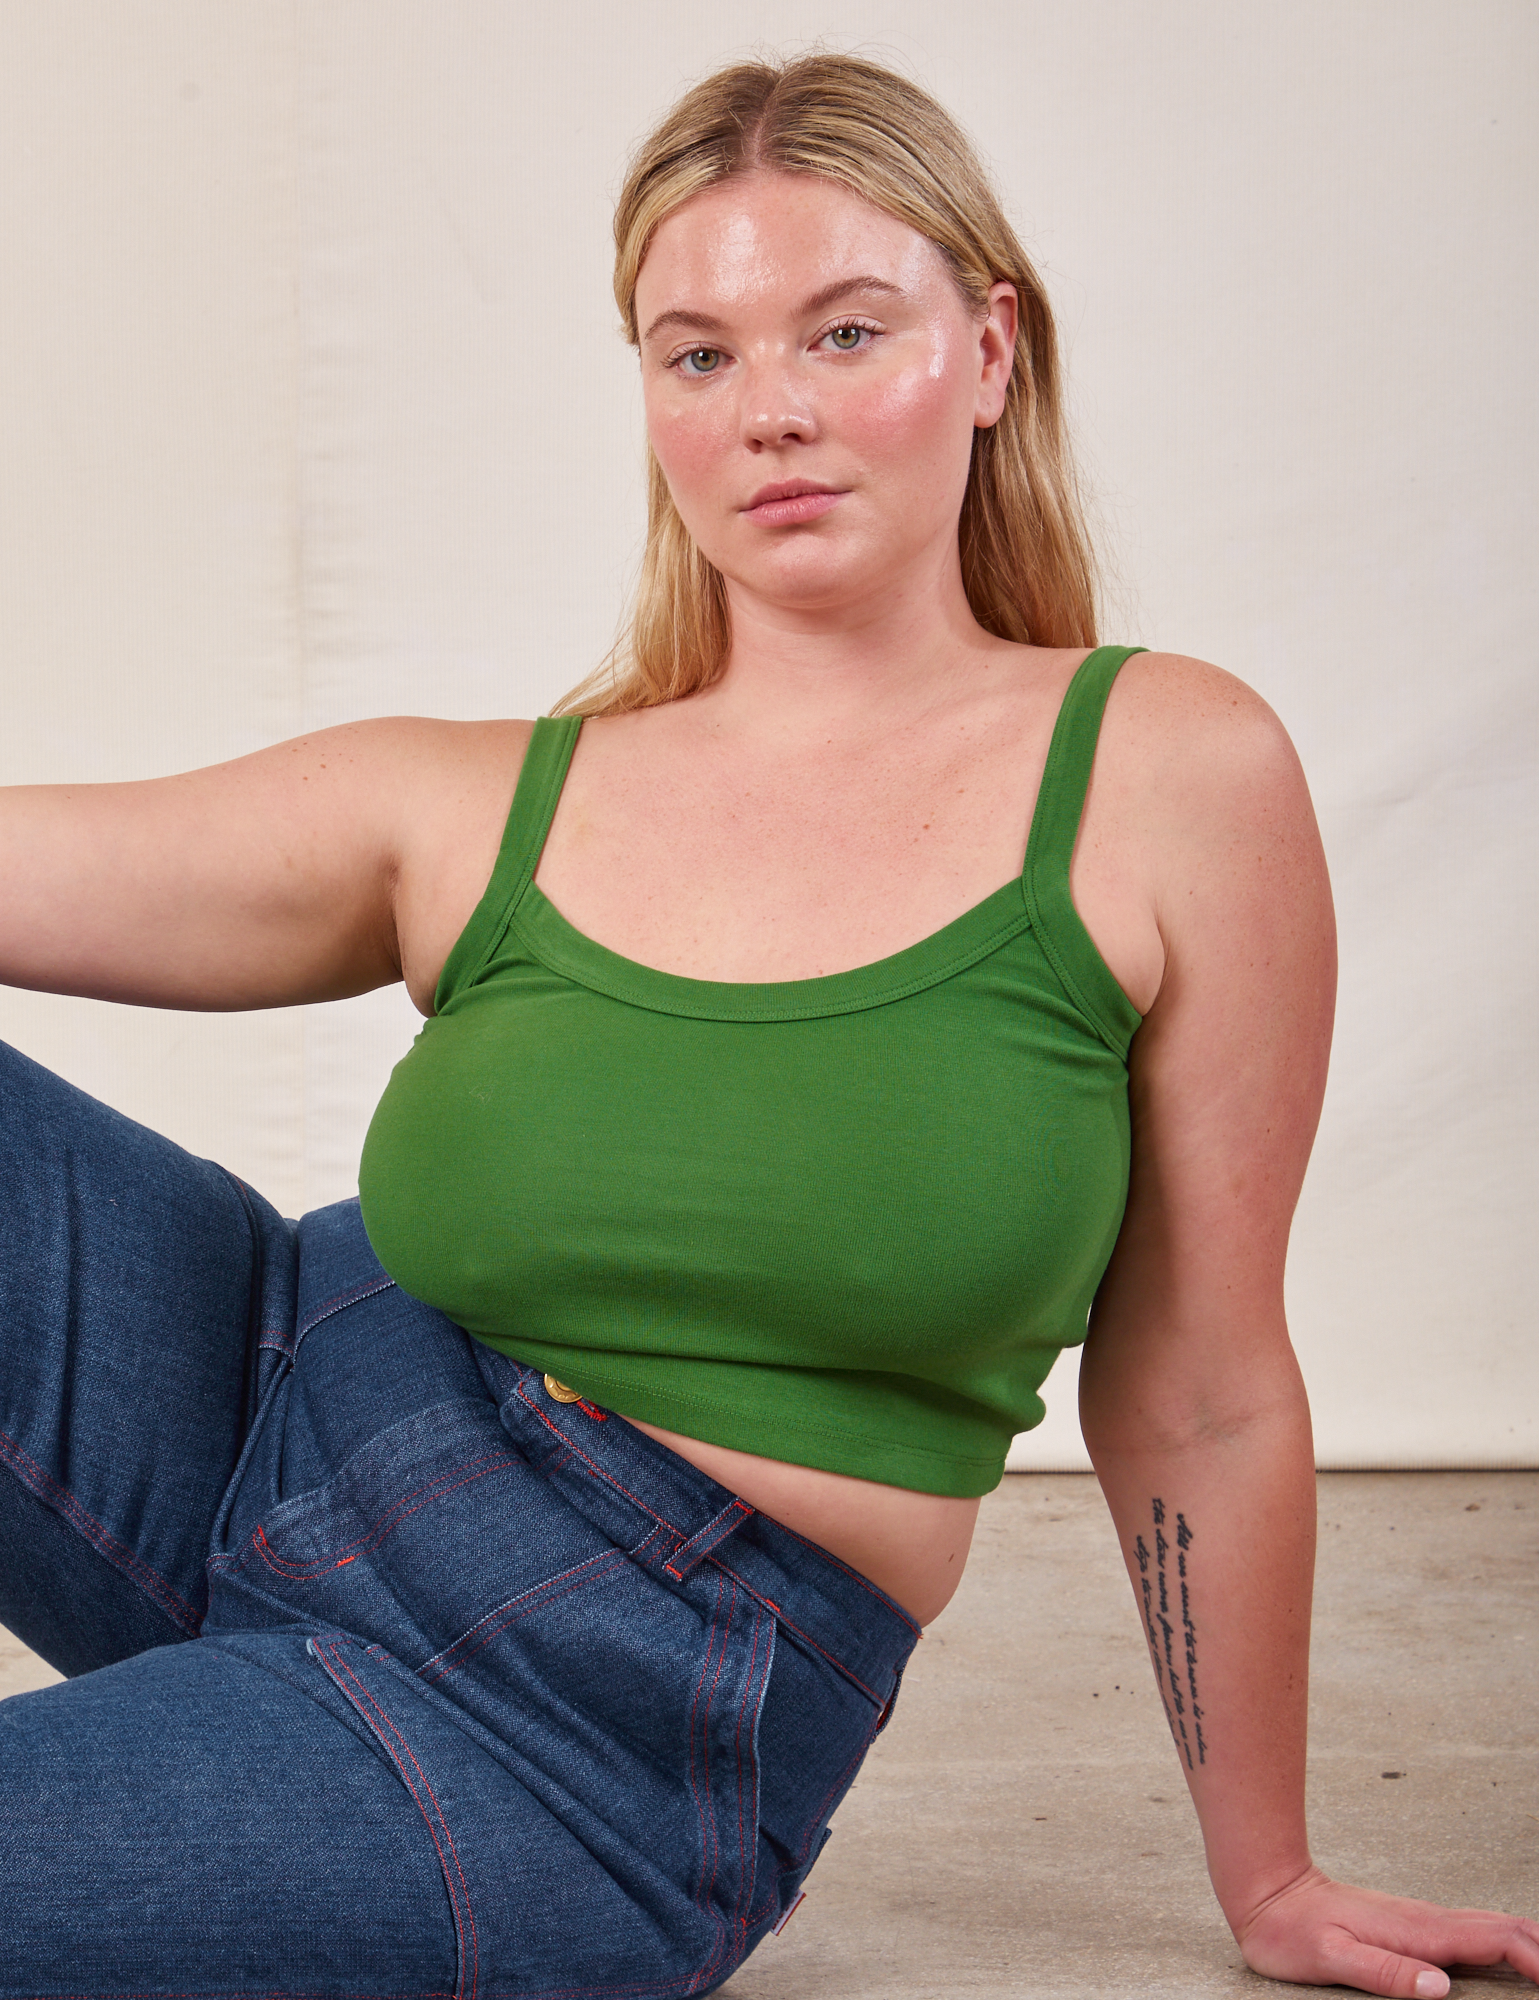 Lish is wearing Cropped Cami in Lawn Green and dark wash Carpenter Jeans